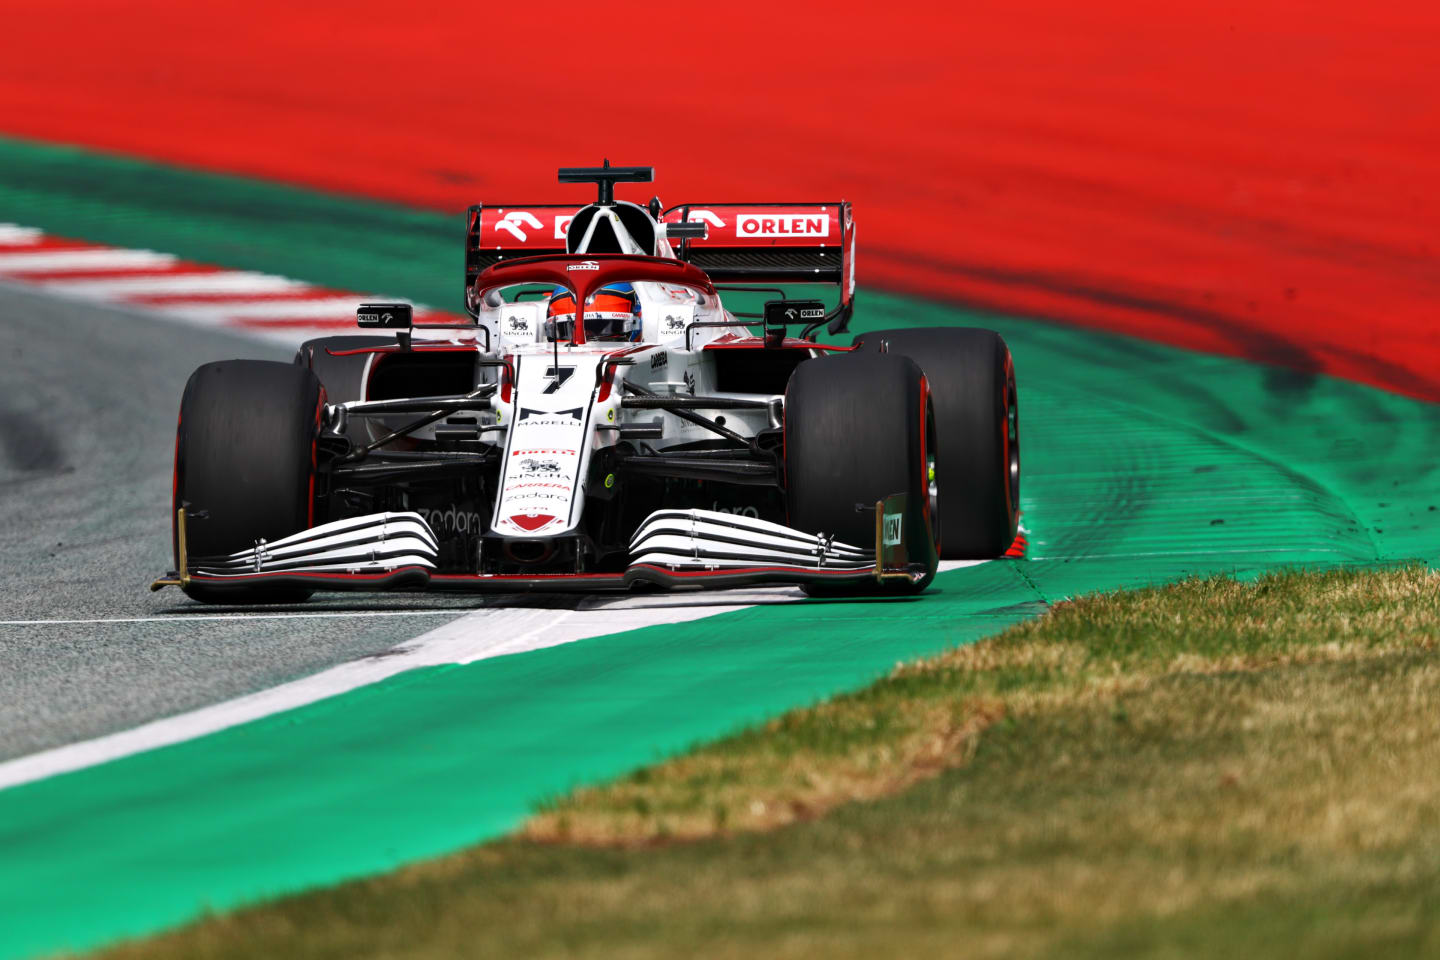 SPIELBERG, AUSTRIA - JUNE 25: Kimi Raikkonen of Finland driving the (7) Alfa Romeo Racing C41 Ferrari on track during practice ahead of the F1 Grand Prix of Styria at Red Bull Ring on June 25, 2021 in Spielberg, Austria. (Photo by Bryn Lennon/Getty Images)